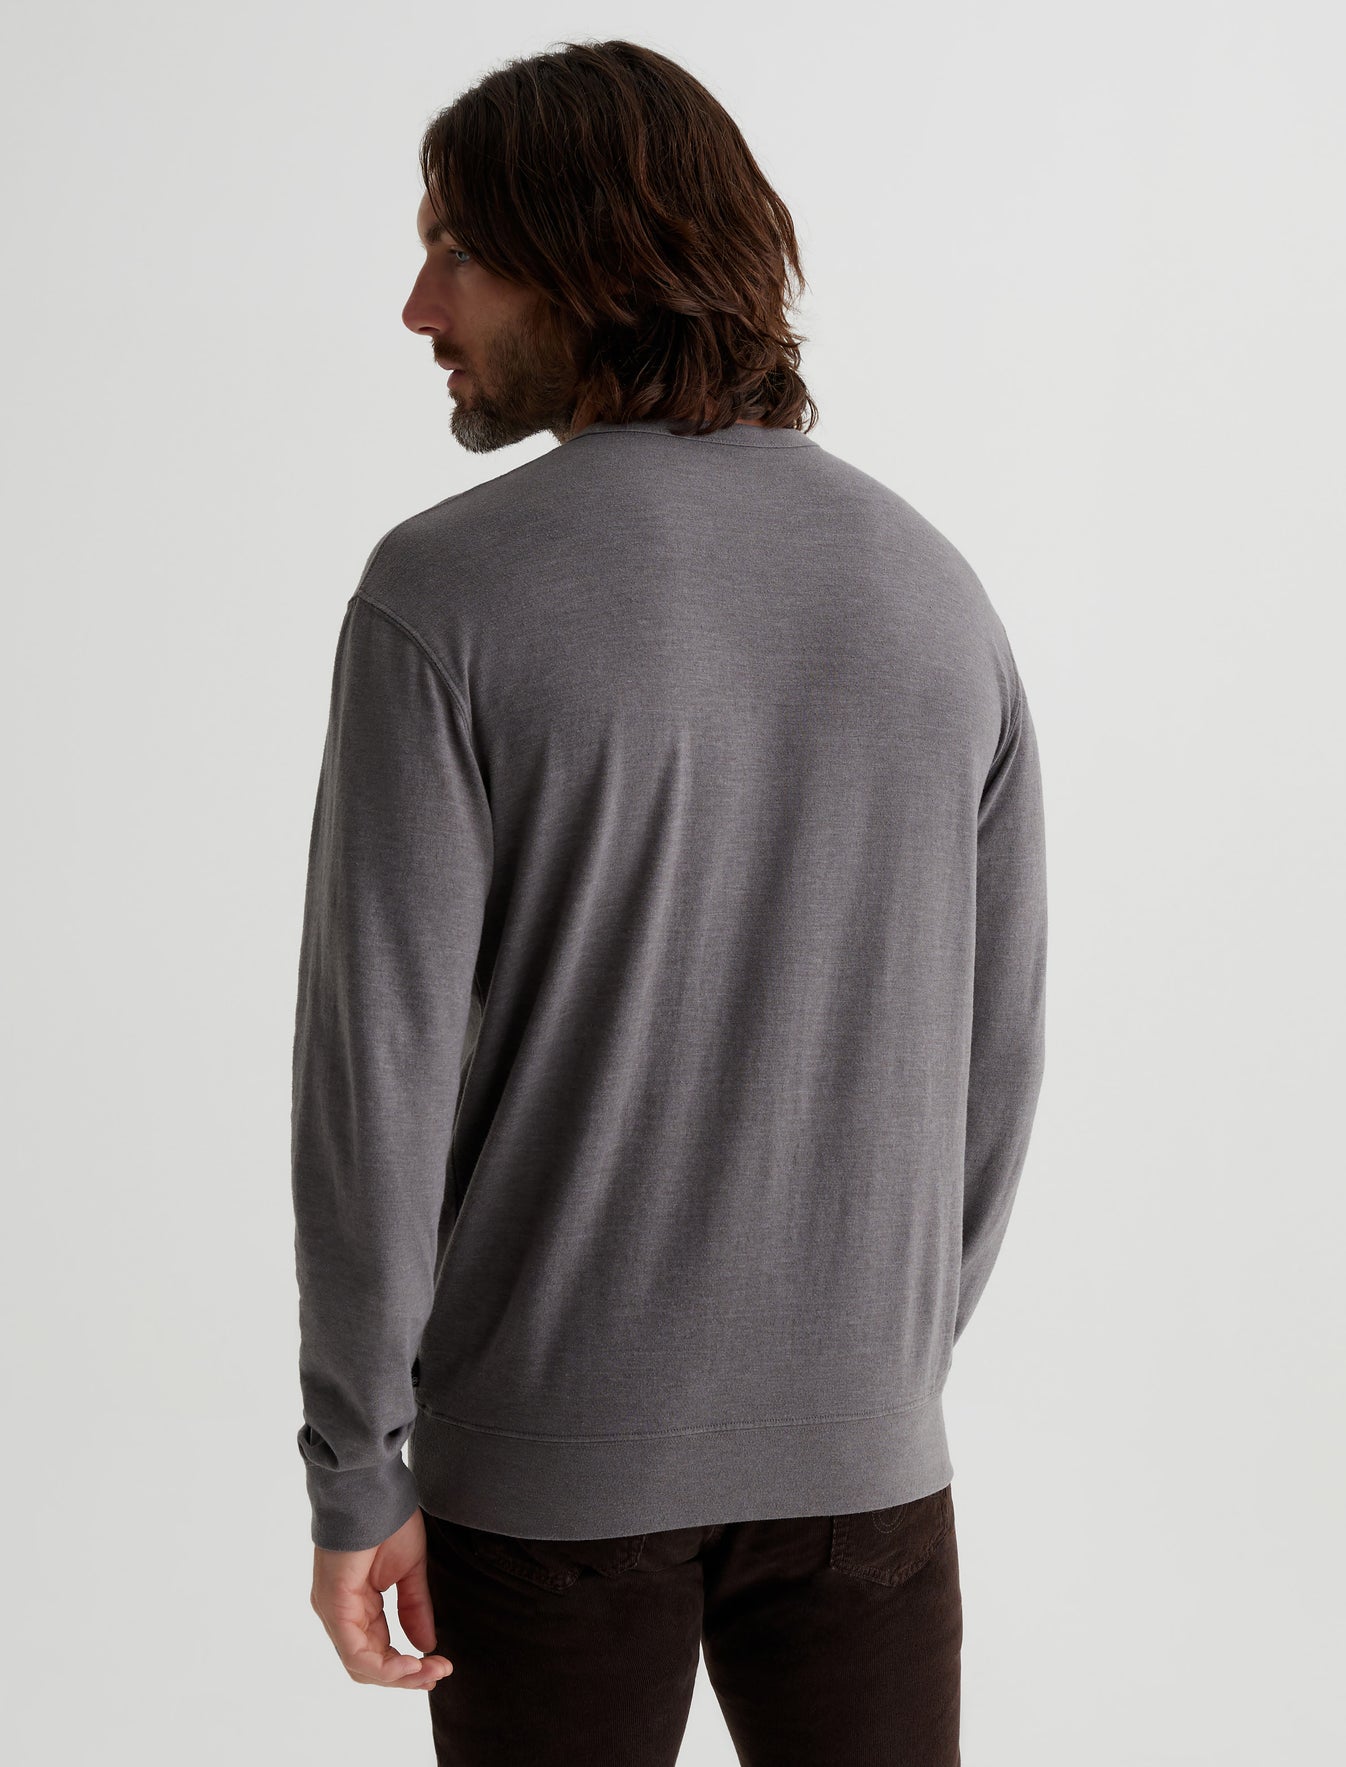 Wesley Pullover Anthracite Relaxed Fit Long Sleeve Crew Neck Pullover Mens Top Photo 6